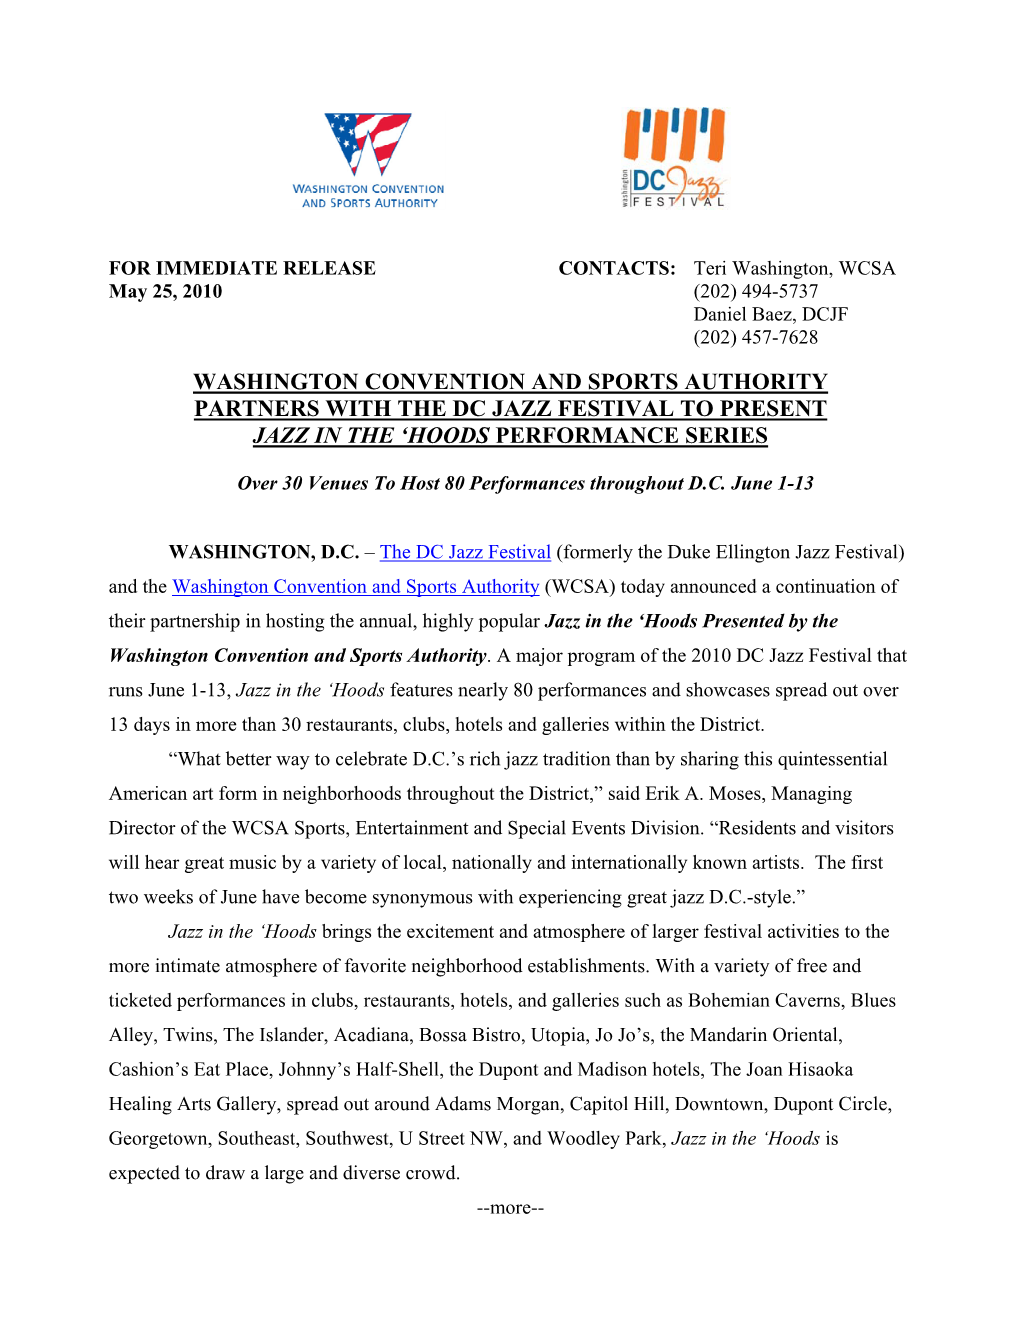 Washington Convention and Sports Authority Partners with the Dc Jazz Festival to Present Jazz in the ‘Hoods Performance Series